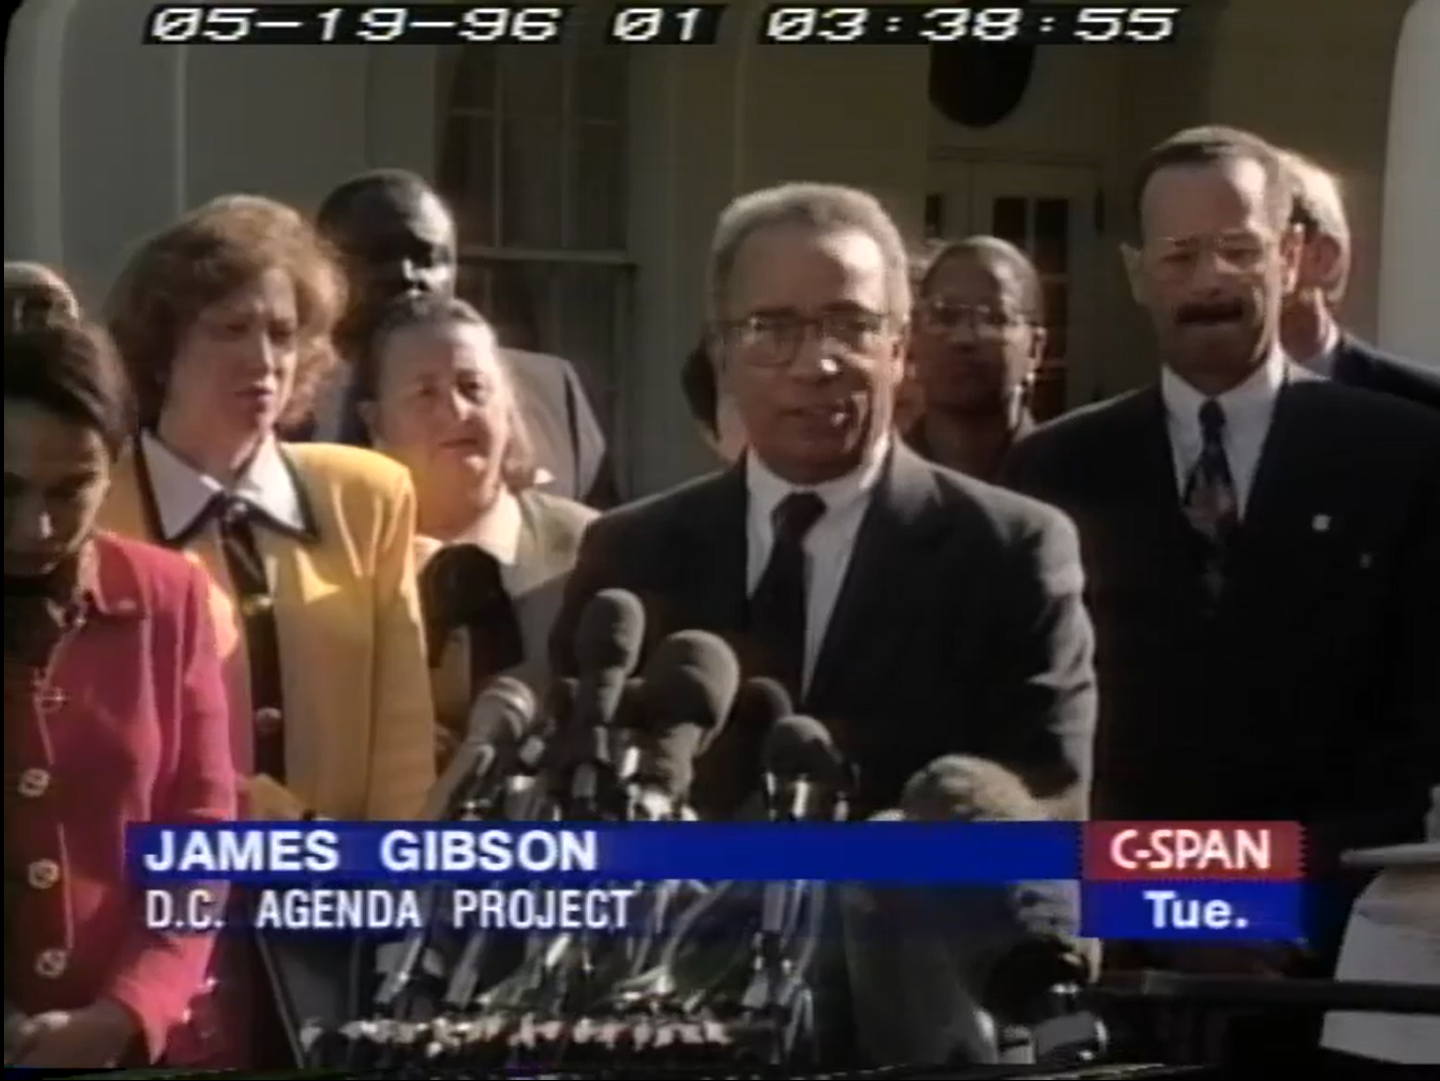 Mr. Gibson speaks at a news briefing outside of the White House in Washington, DC.